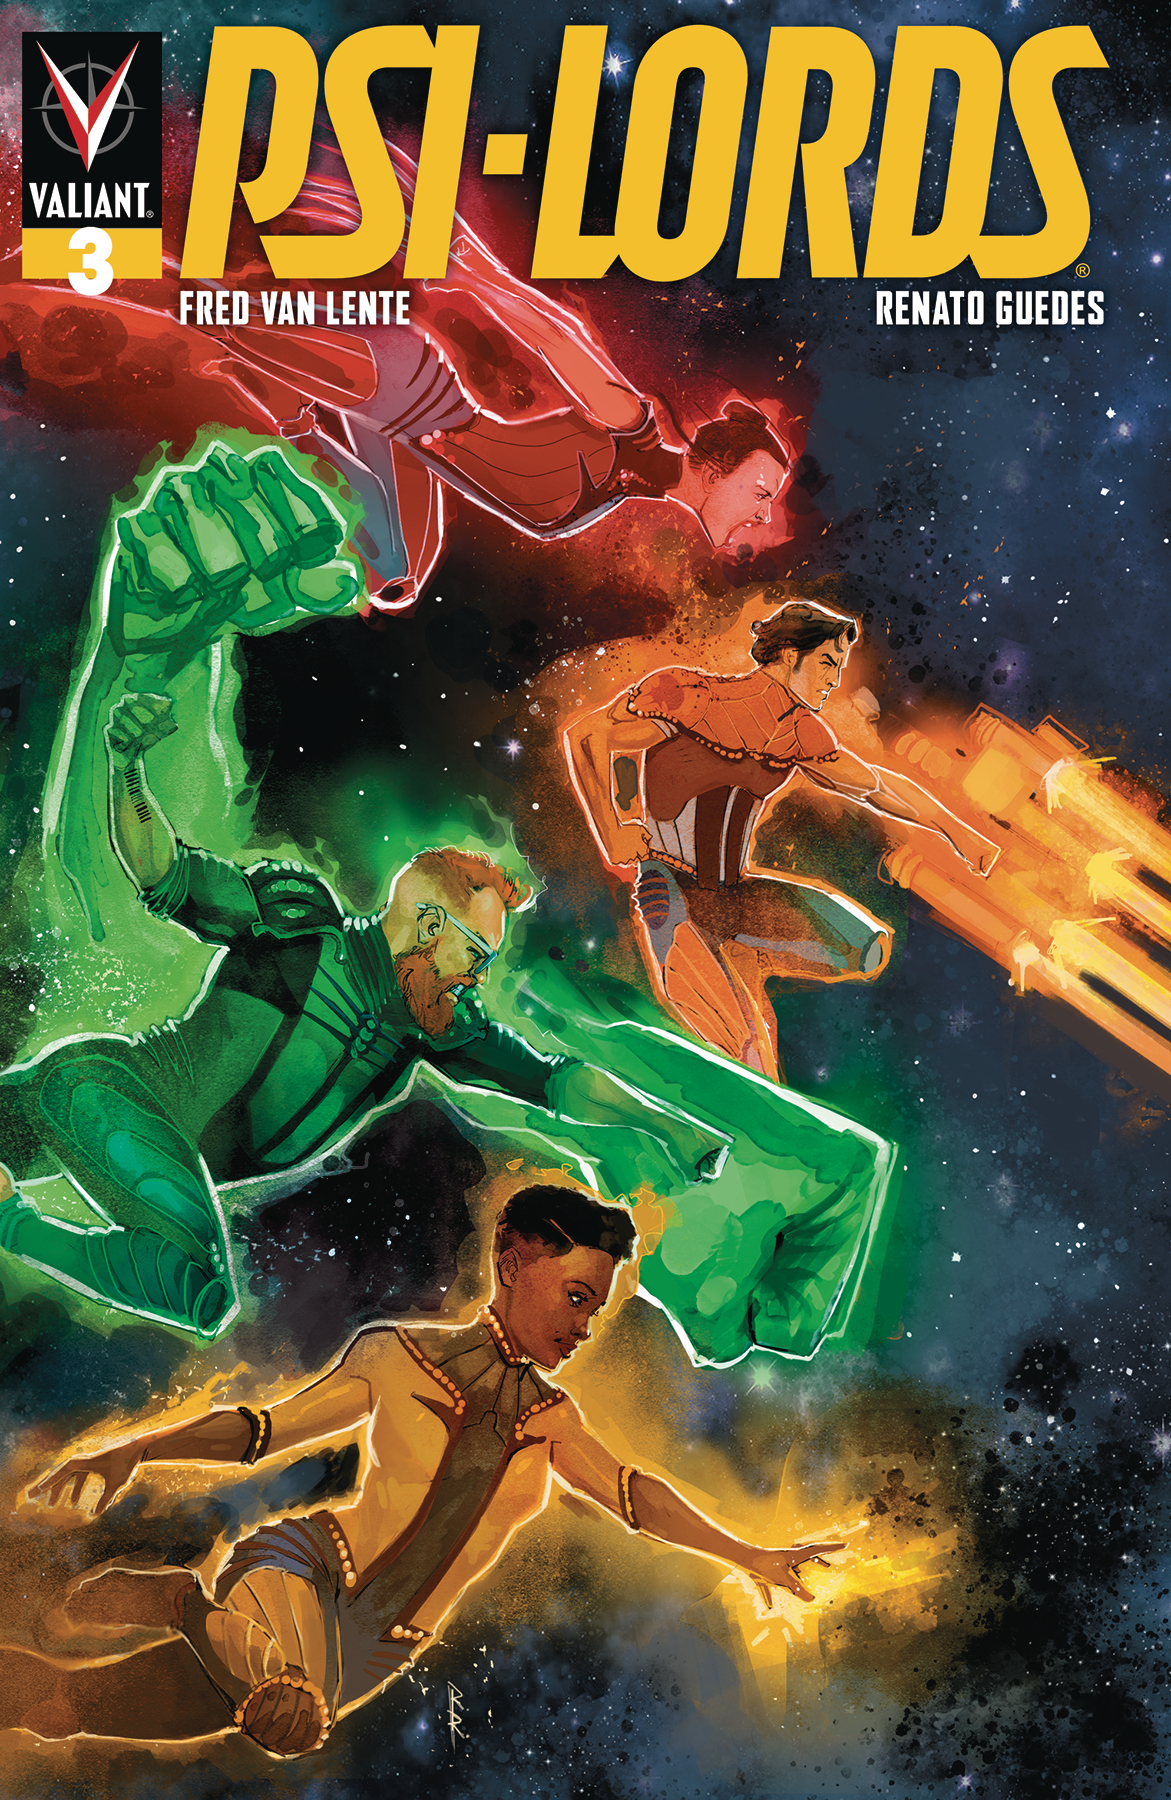 Psi-Lords no. 3 (Variant) (2019 Series)